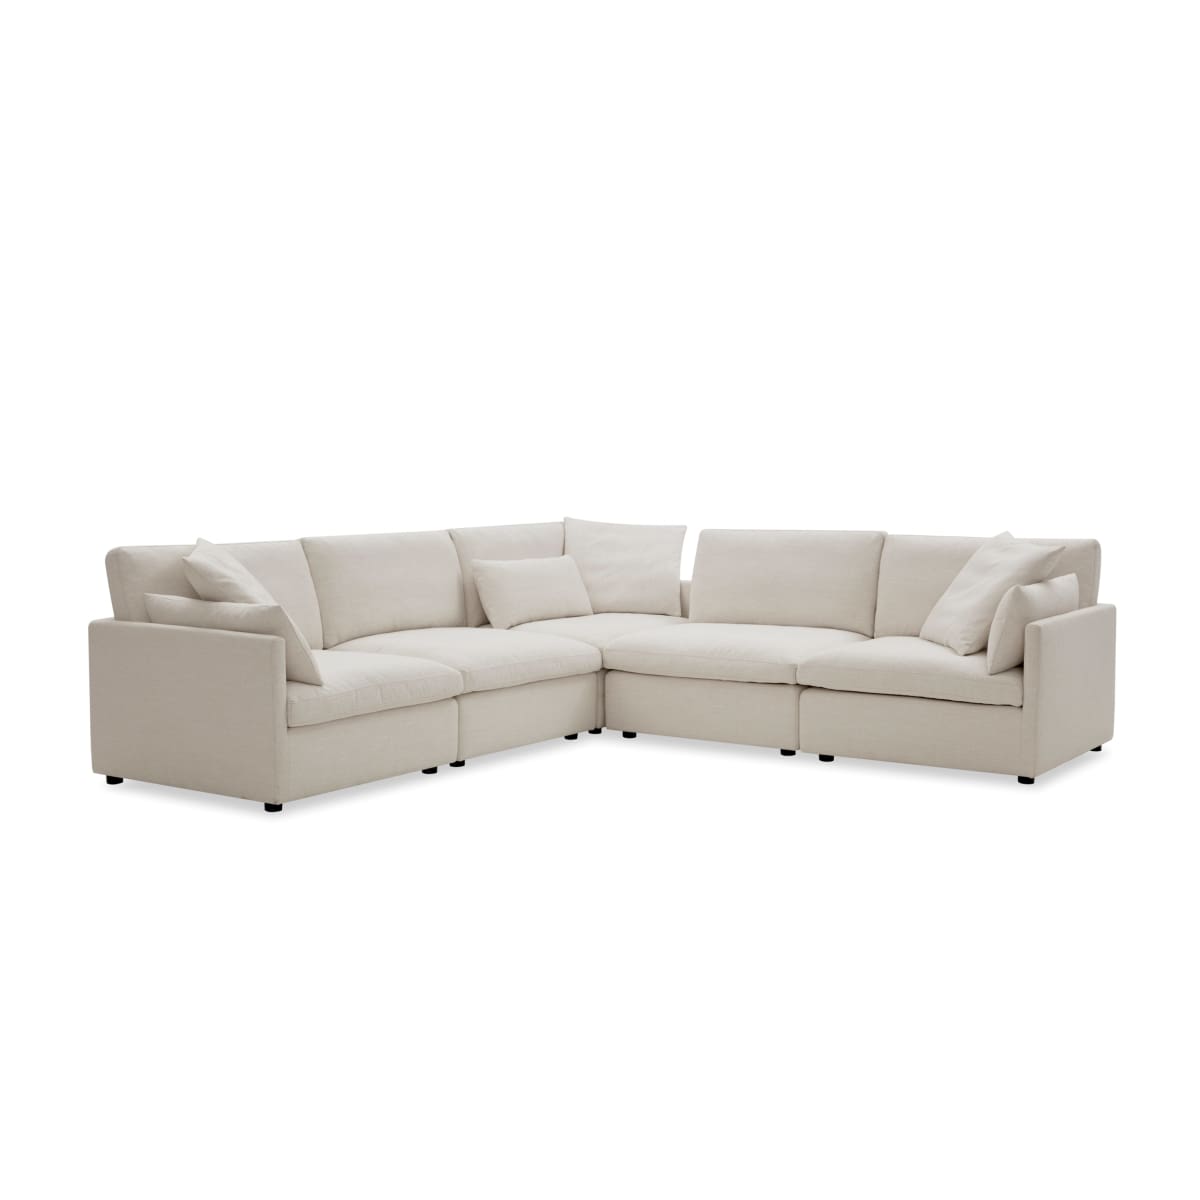 Zoe 5 Piece Modular Sectional | Cream Fabric - lh-import-sectionals